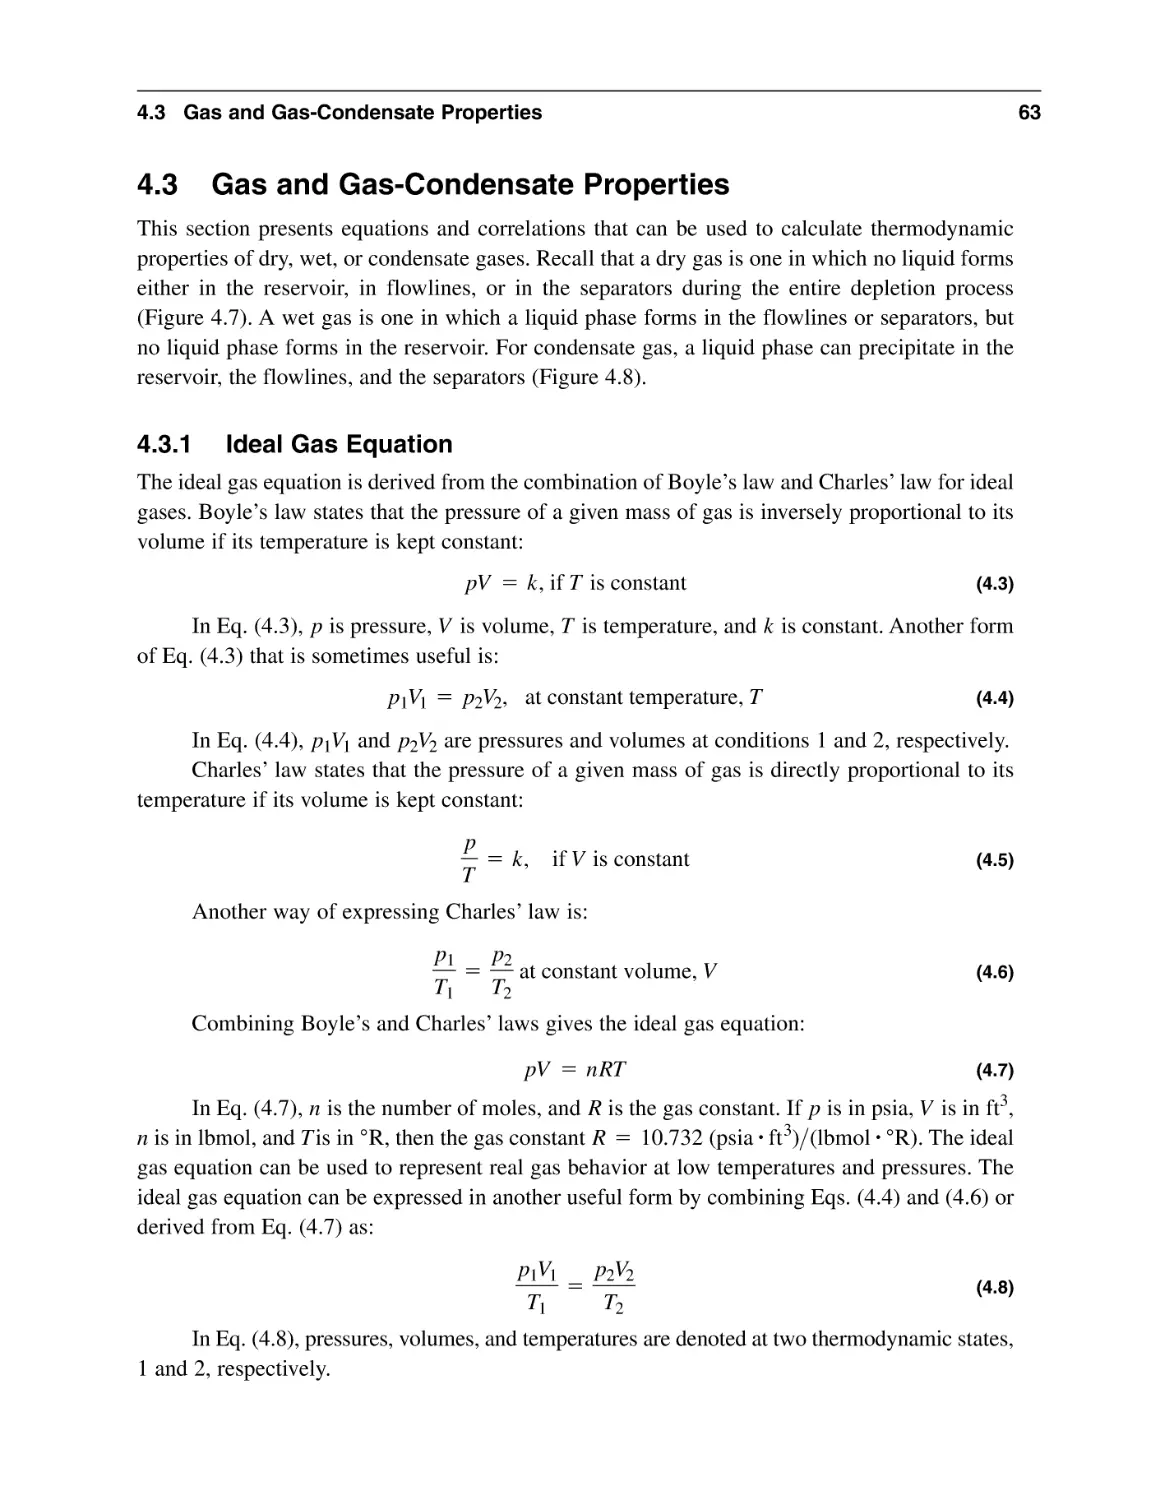 4.3 Gas and Gas-Condensate Properties
4.3.1 Ideal Gas Equation